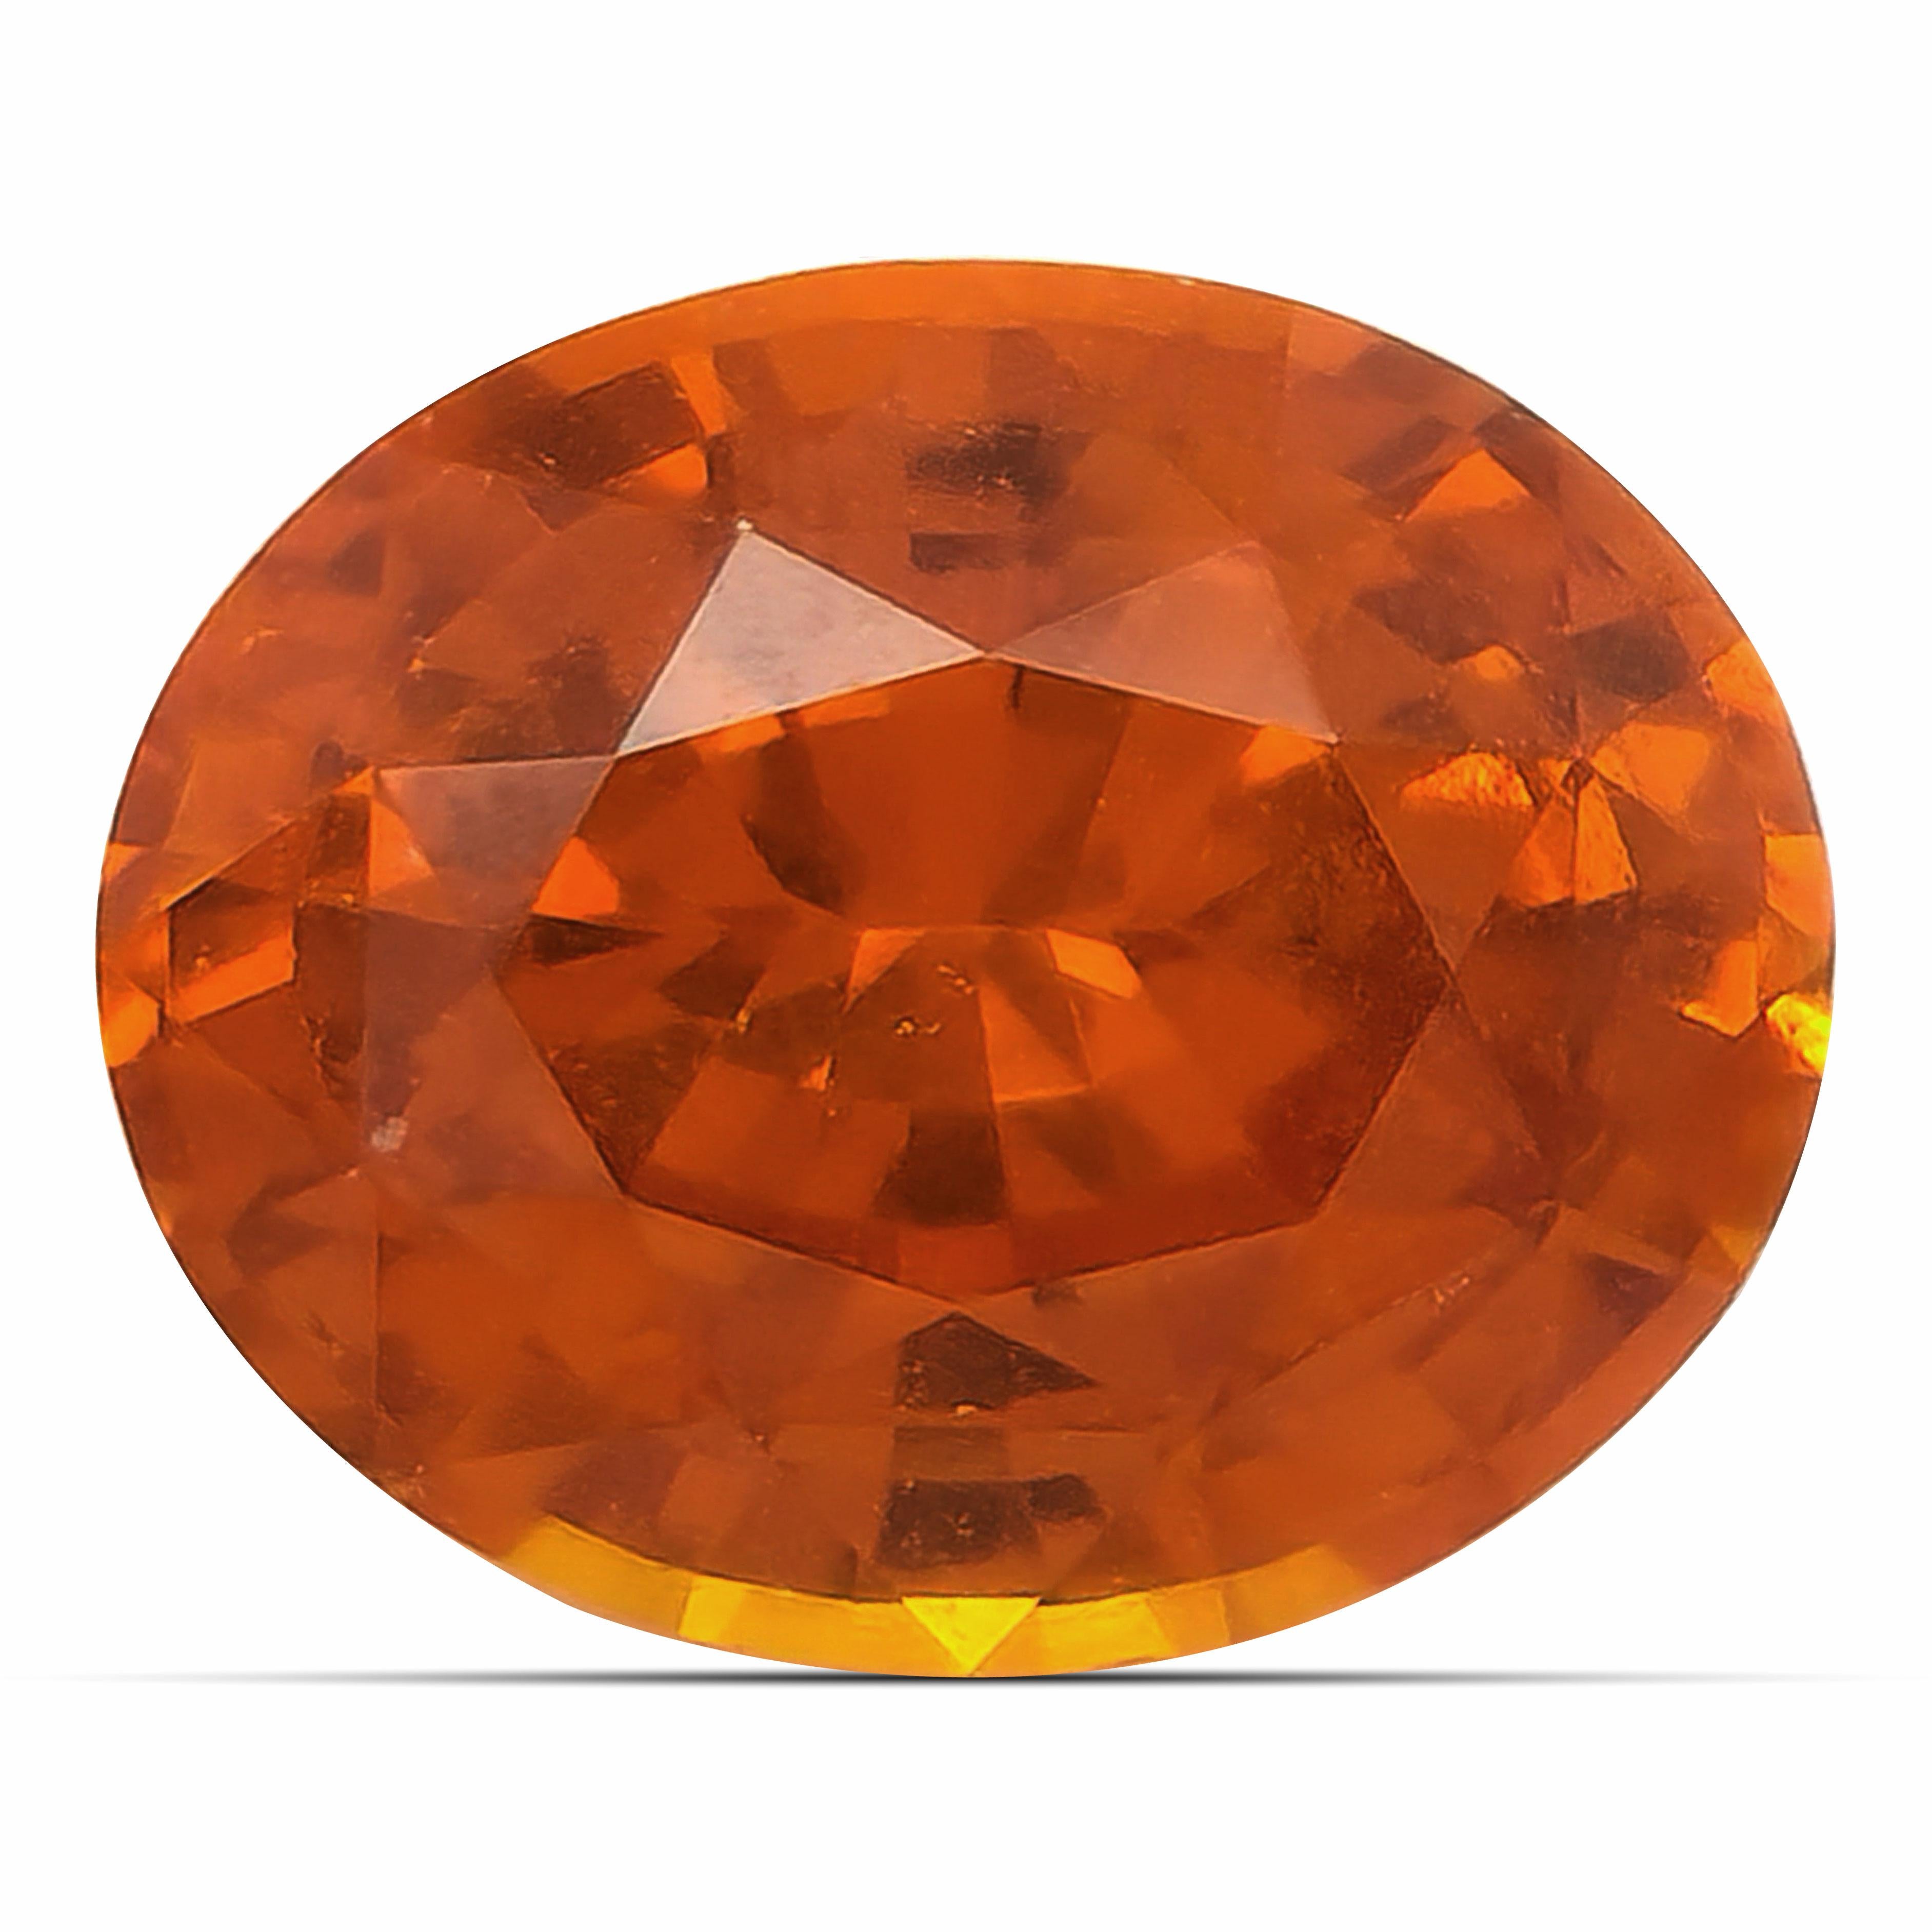 A bright orange, this oval cut Sapphire has a vivid pop of color. Mined in Srilanka, this heated gem comes with an excellent eye clean clarity and an unmatched sparkle, that will easily have you falling in love.

Identification: Natural Orange